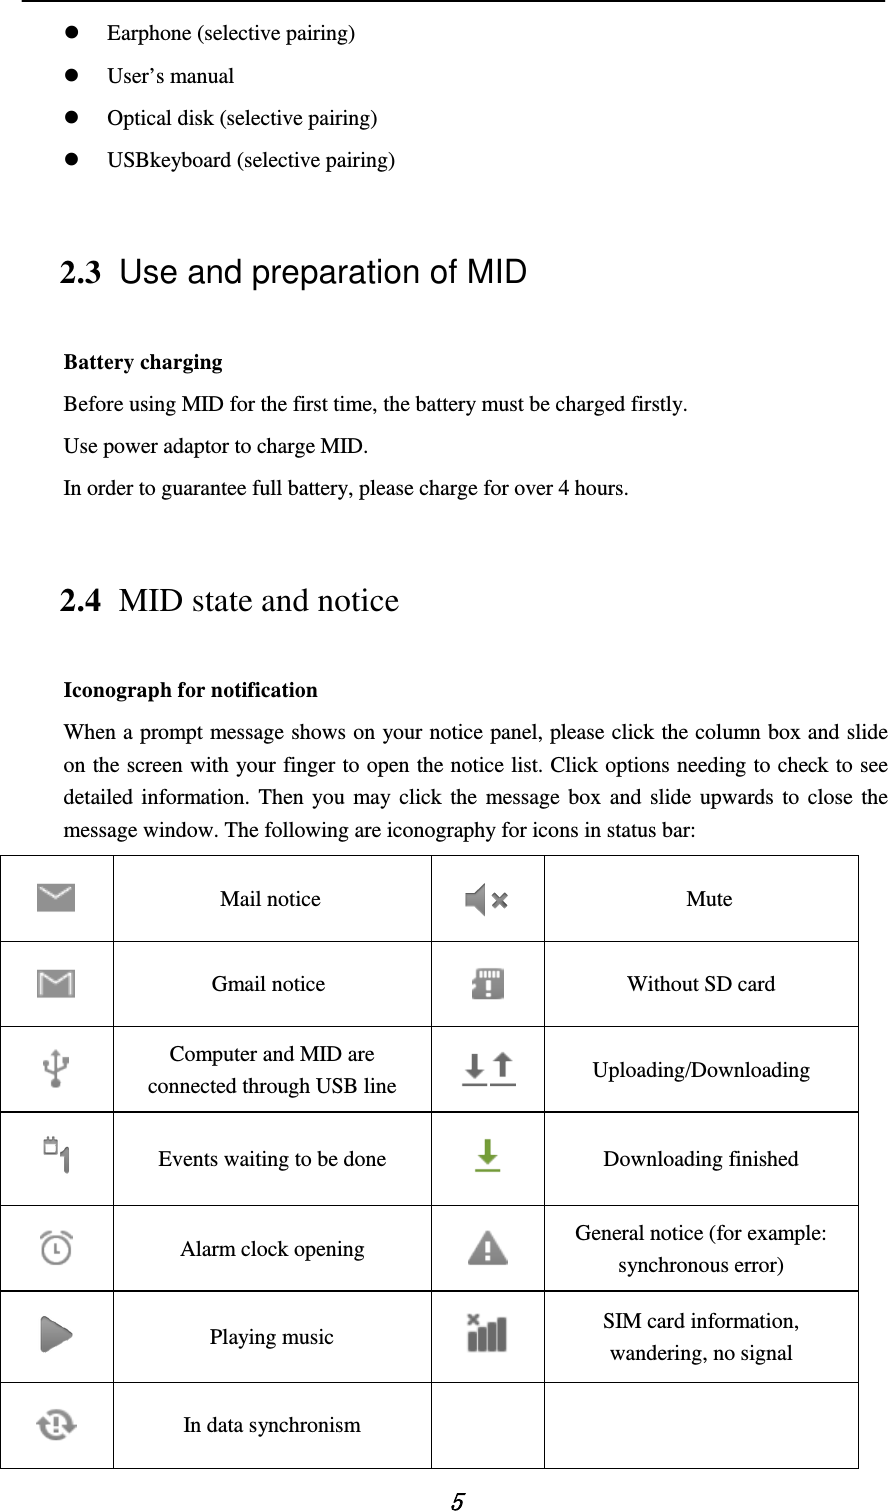   5  Earphone (selective pairing)  User’s manual  Optical disk (selective pairing)  USBkeyboard (selective pairing) 2.3 Use and preparation of MID Battery charging Before using MID for the first time, the battery must be charged firstly. Use power adaptor to charge MID. In order to guarantee full battery, please charge for over 4 hours. 2.4 MID state and notice Iconograph for notification When a prompt message shows on your notice panel, please click the column box and slide on the screen with your finger to open the notice list. Click options needing to check to see detailed information. Then you may click the message box and slide upwards to close the message window. The following are iconography for icons in status bar:  Mail notice  Mute  Gmail notice  Without SD card  Computer and MID are connected through USB line   Uploading/Downloading  Events waiting to be done   Downloading finished  Alarm clock opening  General notice (for example: synchronous error)  Playing music  SIM card information, wandering, no signal  In data synchronism    